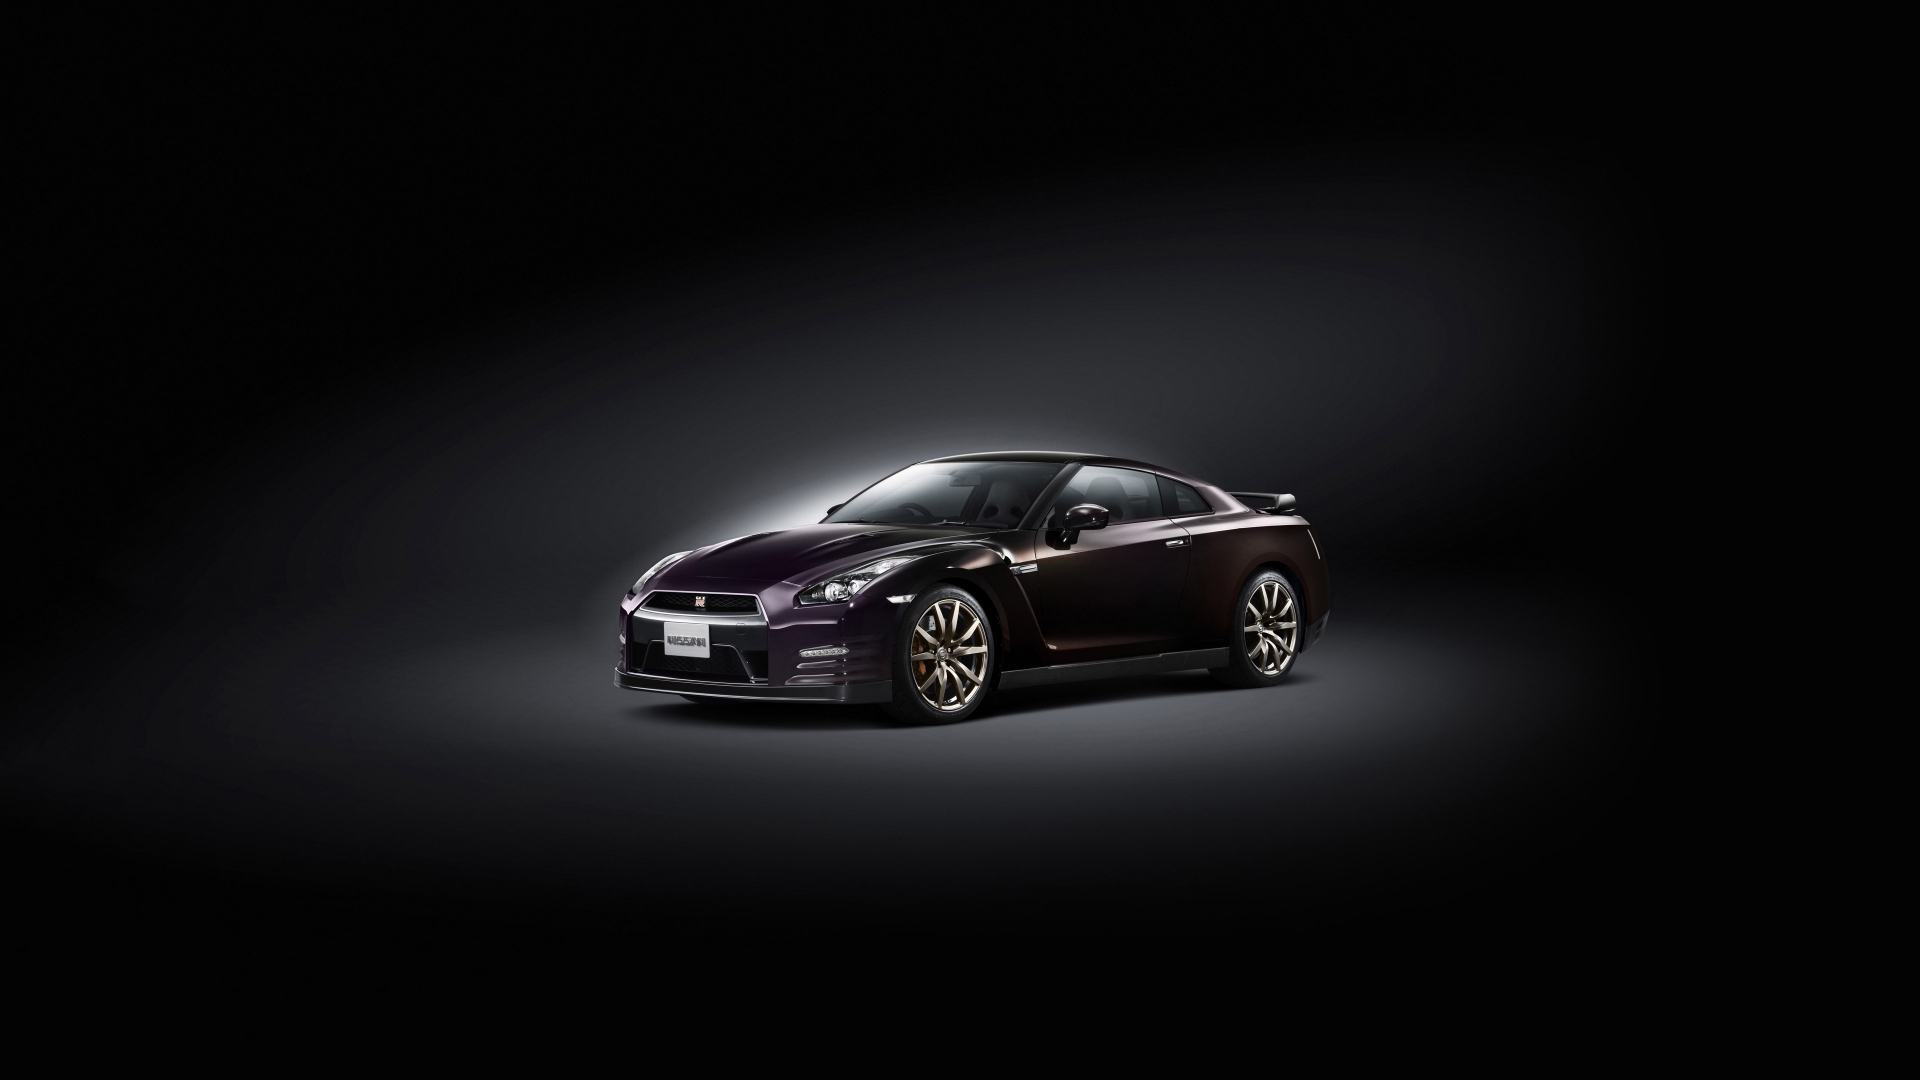 Nissan GT-R Special Edition 2014 for 1920 x 1080 HDTV 1080p resolution